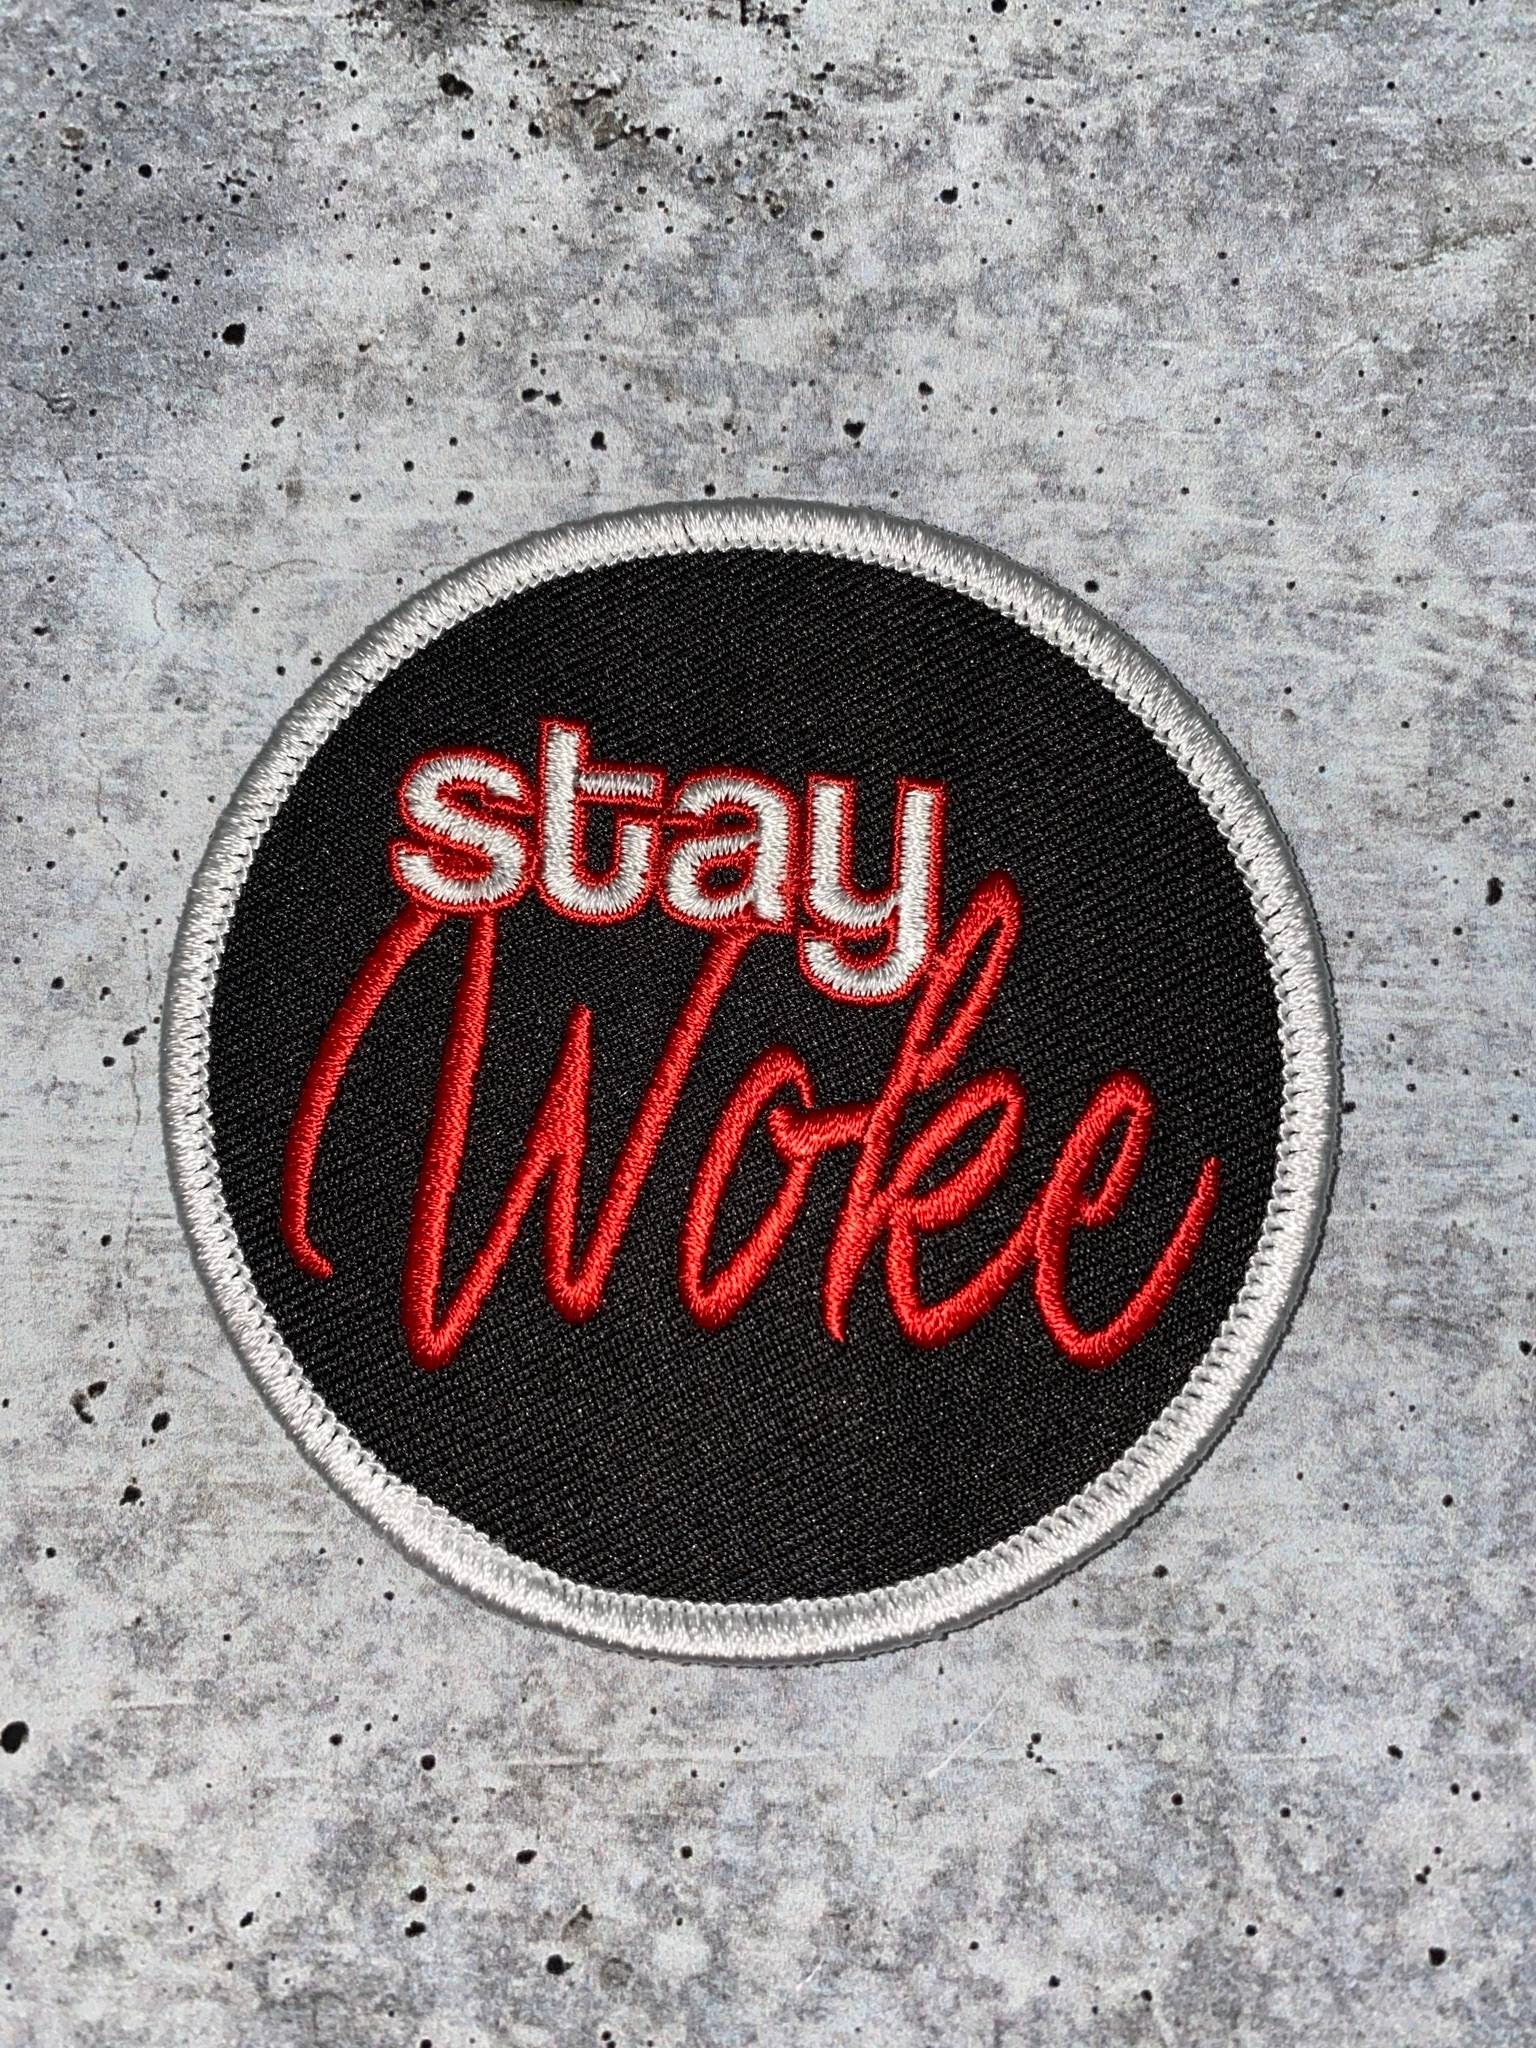 Exclusive, "Stay Woke" Iron-on Embroidered Patch,  Statement Patch for Clothing and Accessories, Size 3", Black Unity Patch, DIY Applique,